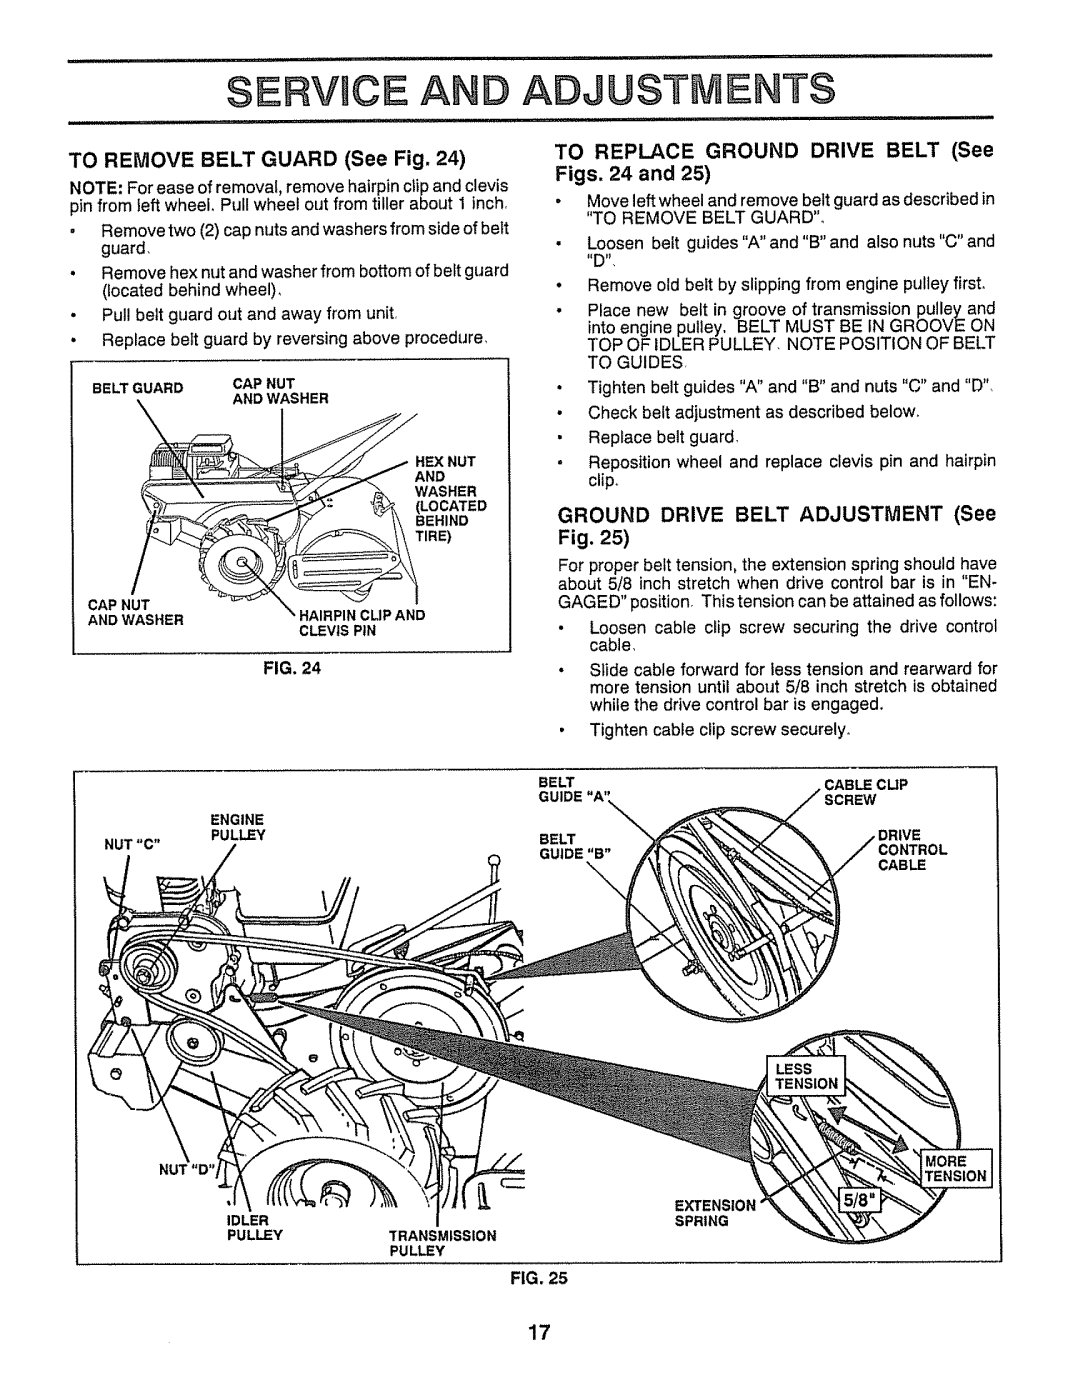 Craftsman 917.29555 Servuce And Adjustments, TO REMOVE BELT GUARD See Fig, TO REPLACE GROUND DRIVE BELT See Figs. 24 and 